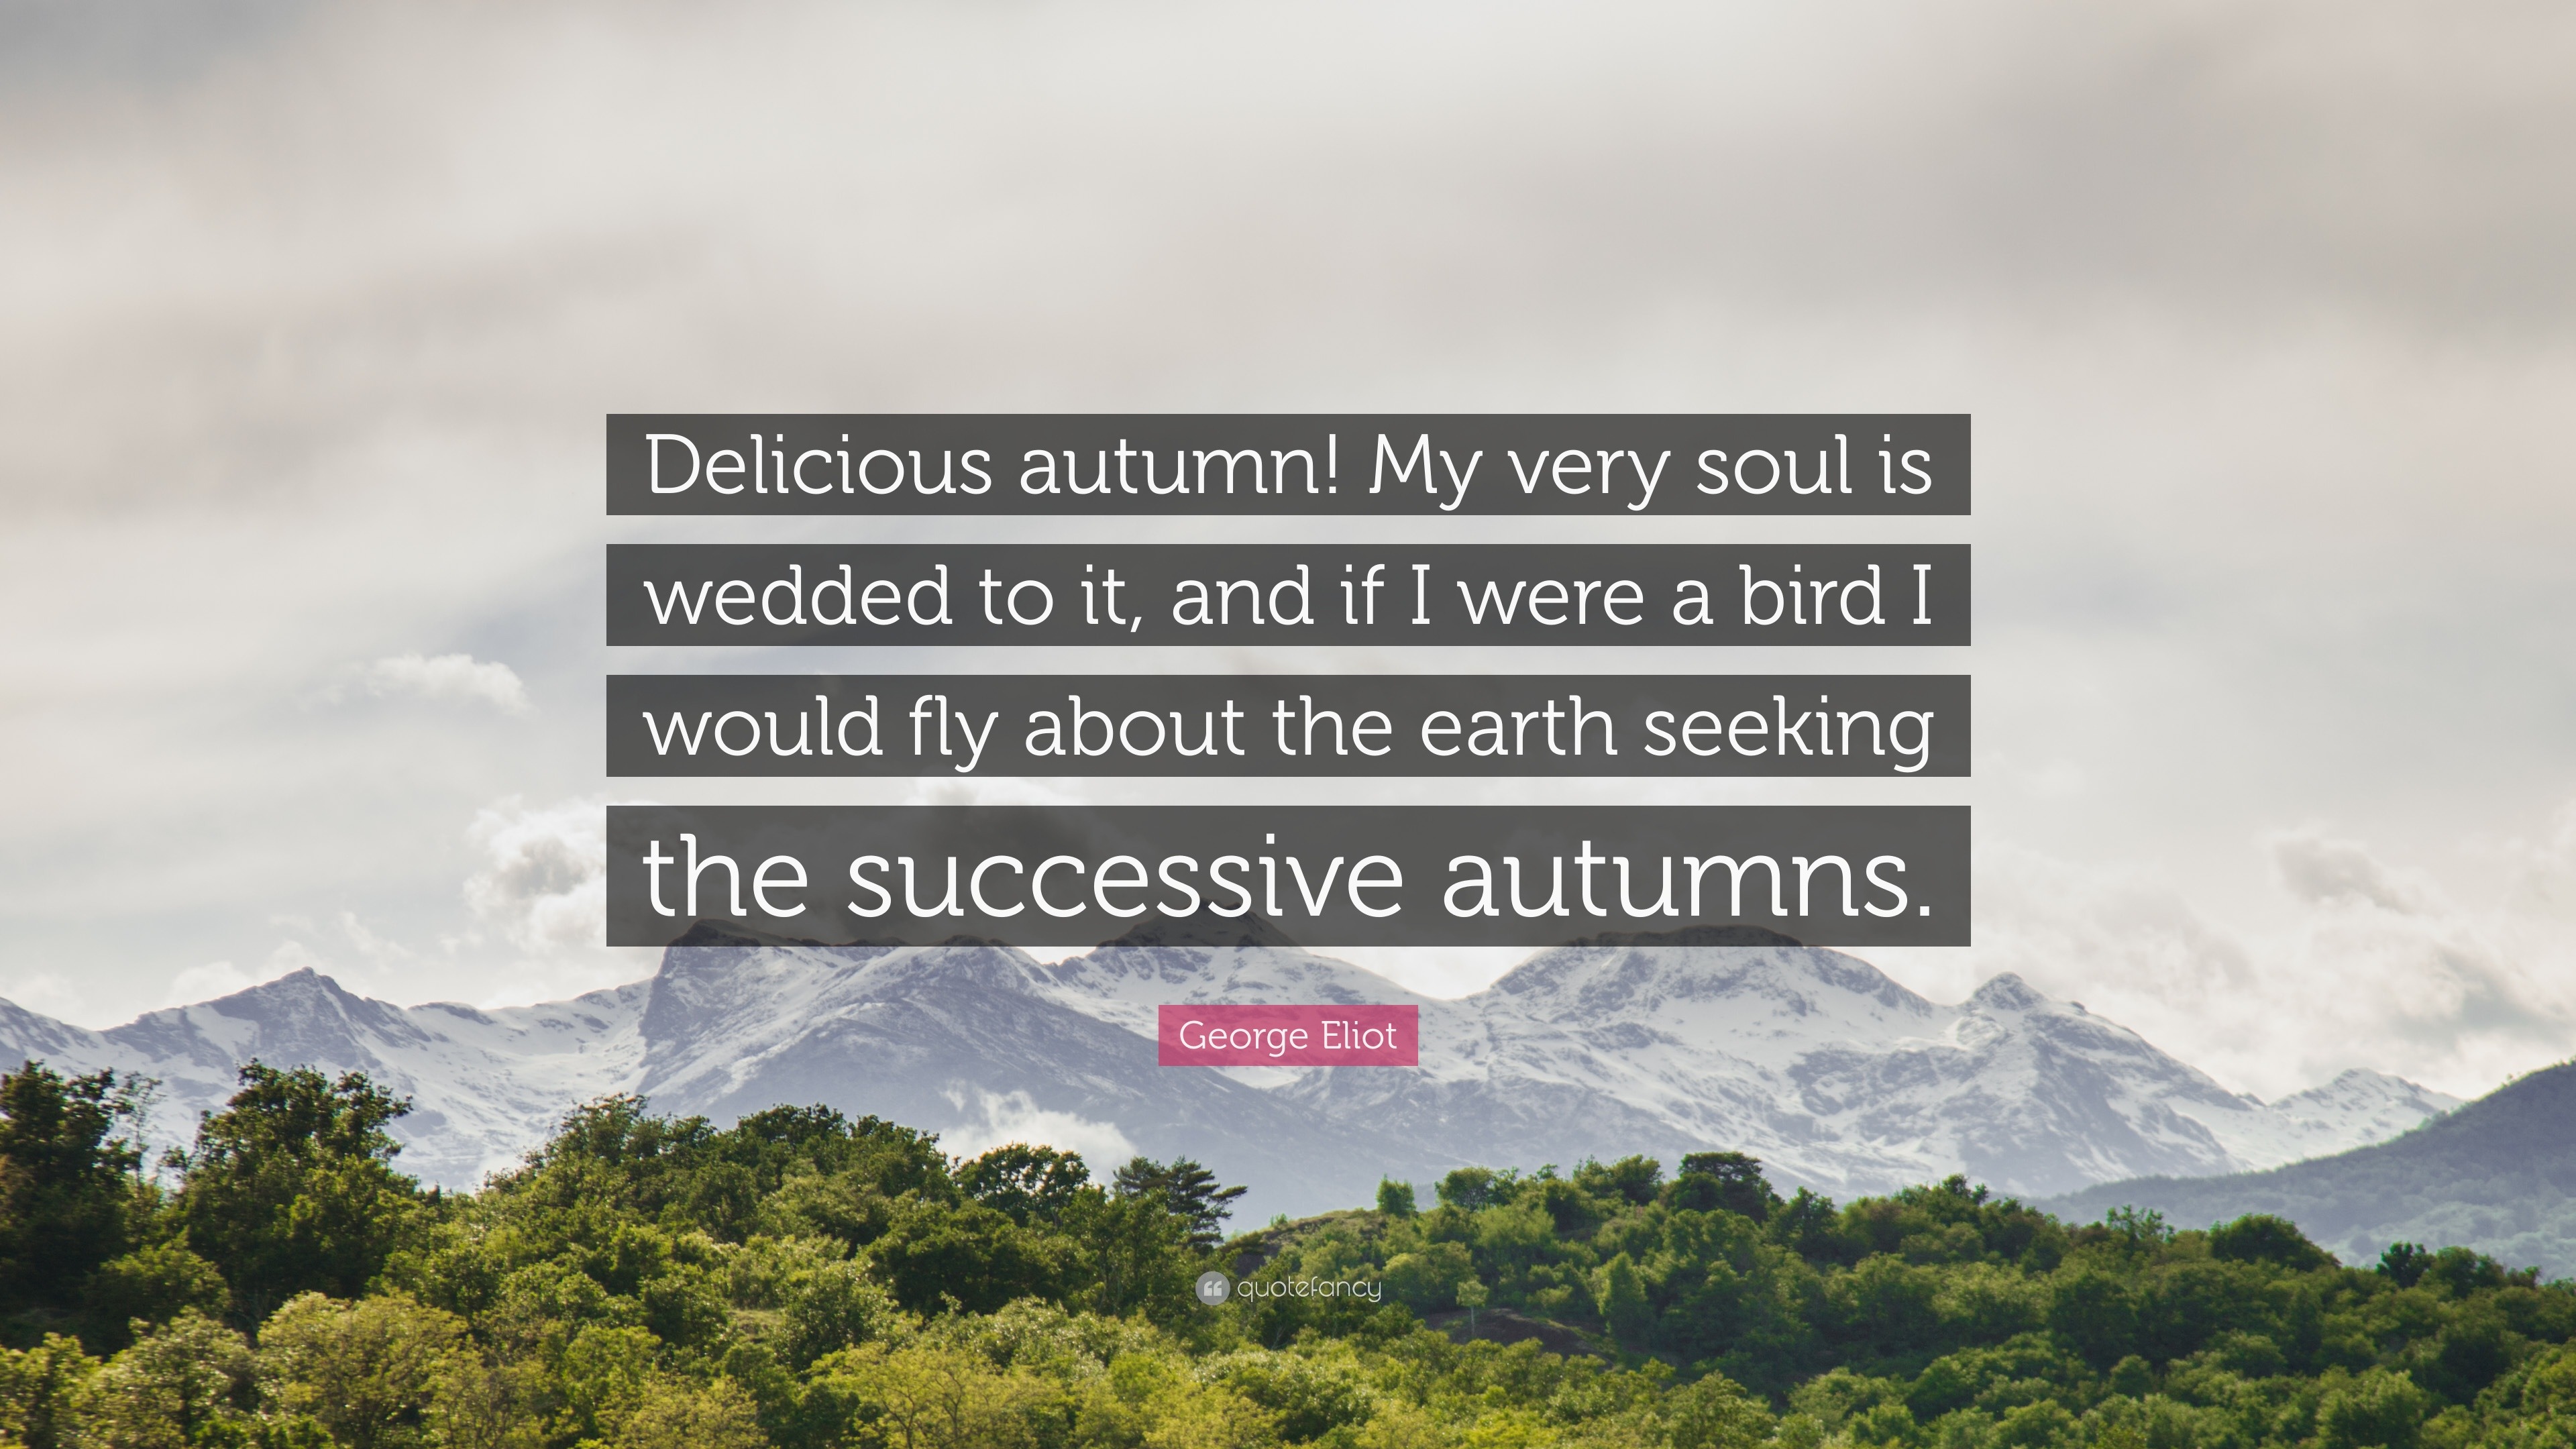 FALL GUY - Idiom of the day by Reverso! #englishidioms